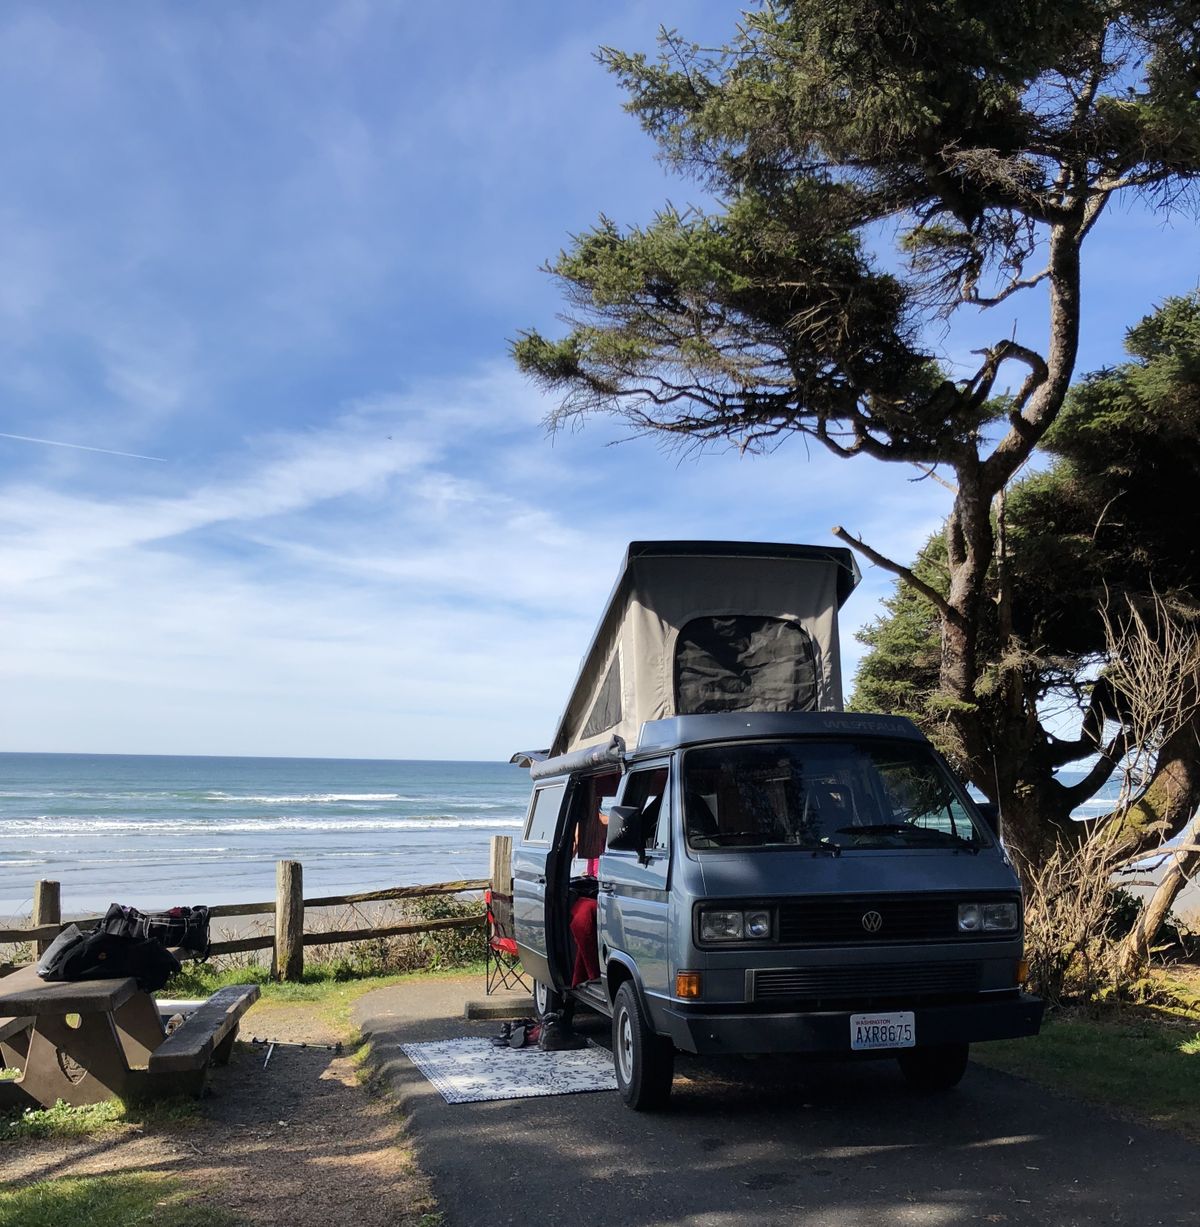 Seattle-based Peace Vans uses Outdoorsy as its booking service, offering customers the option to take advantage of that company